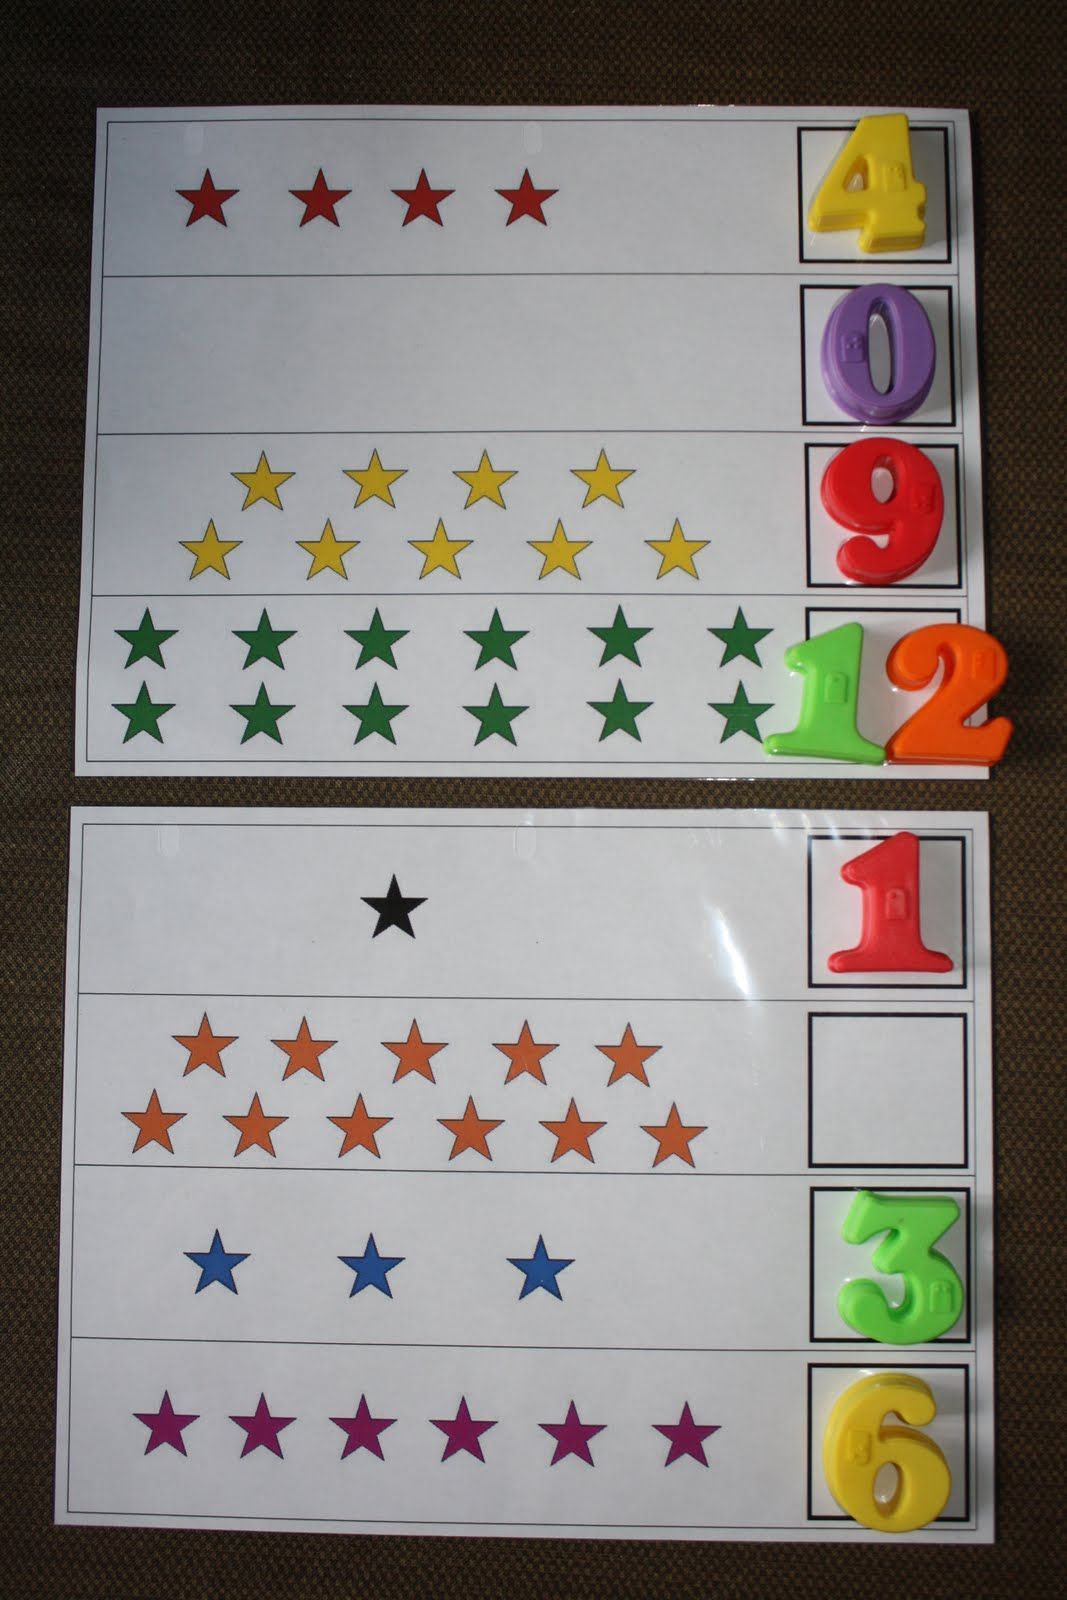 Counting…instead of using magnetic numbers, laminate and write the numbers to hit the standard for writing numbers